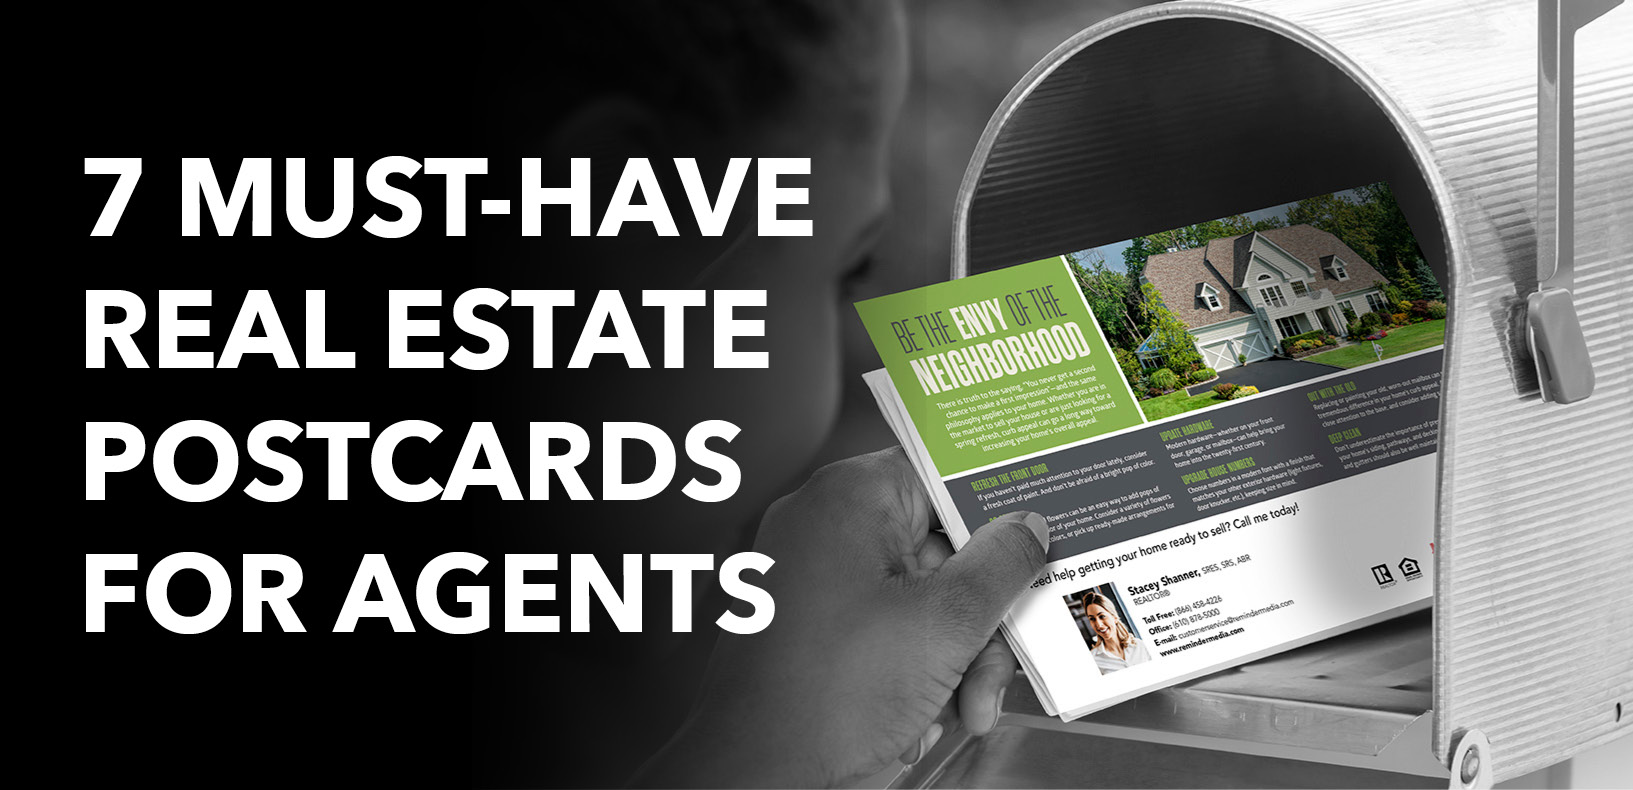 7 Must-Have Real Estate Postcards for Agents